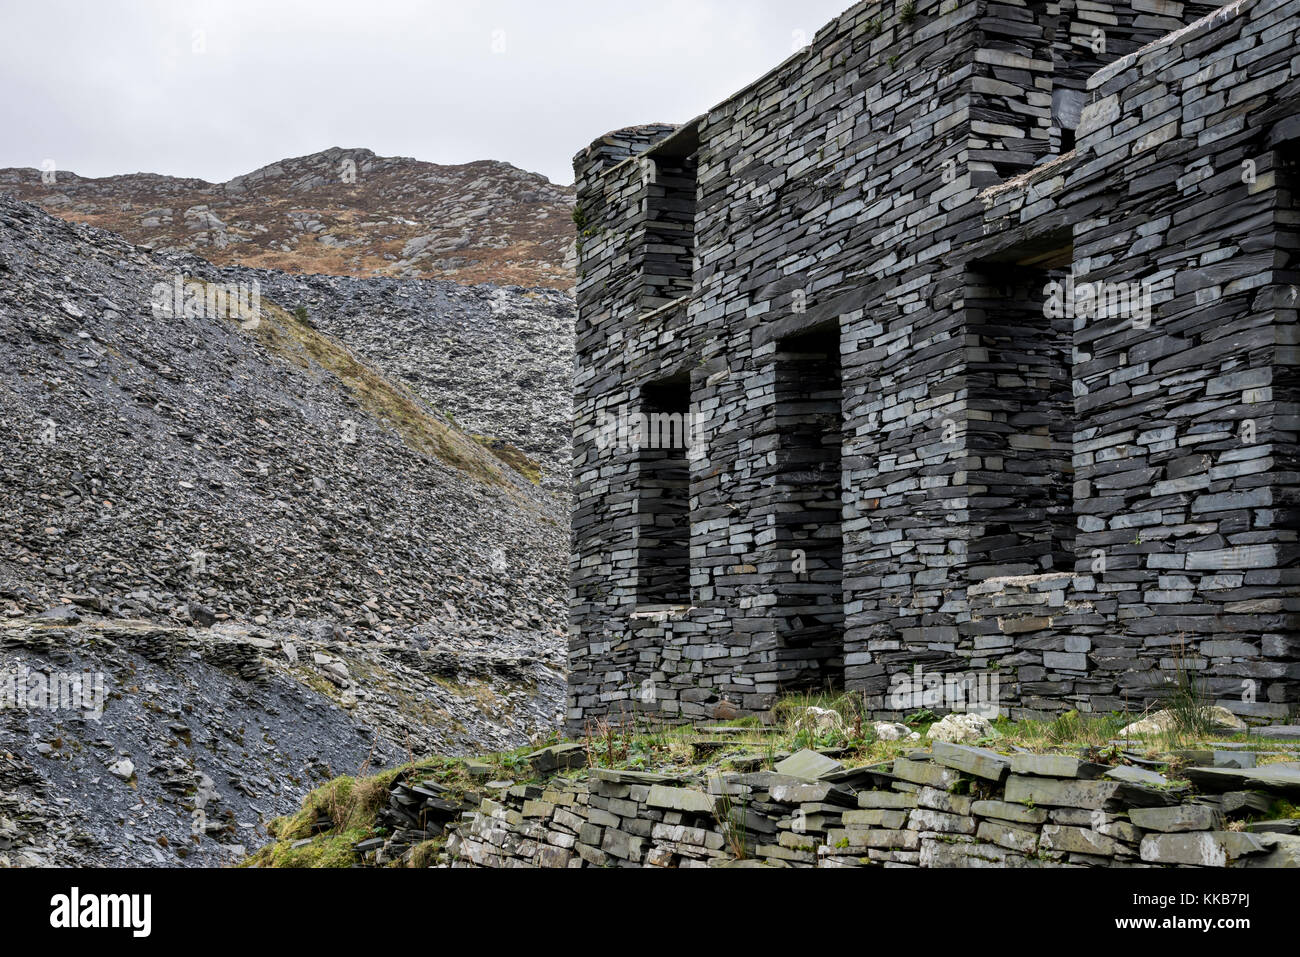 Old slate quarry at Cwmorthin, Tanygrisiau, North Wales. Stock Photo